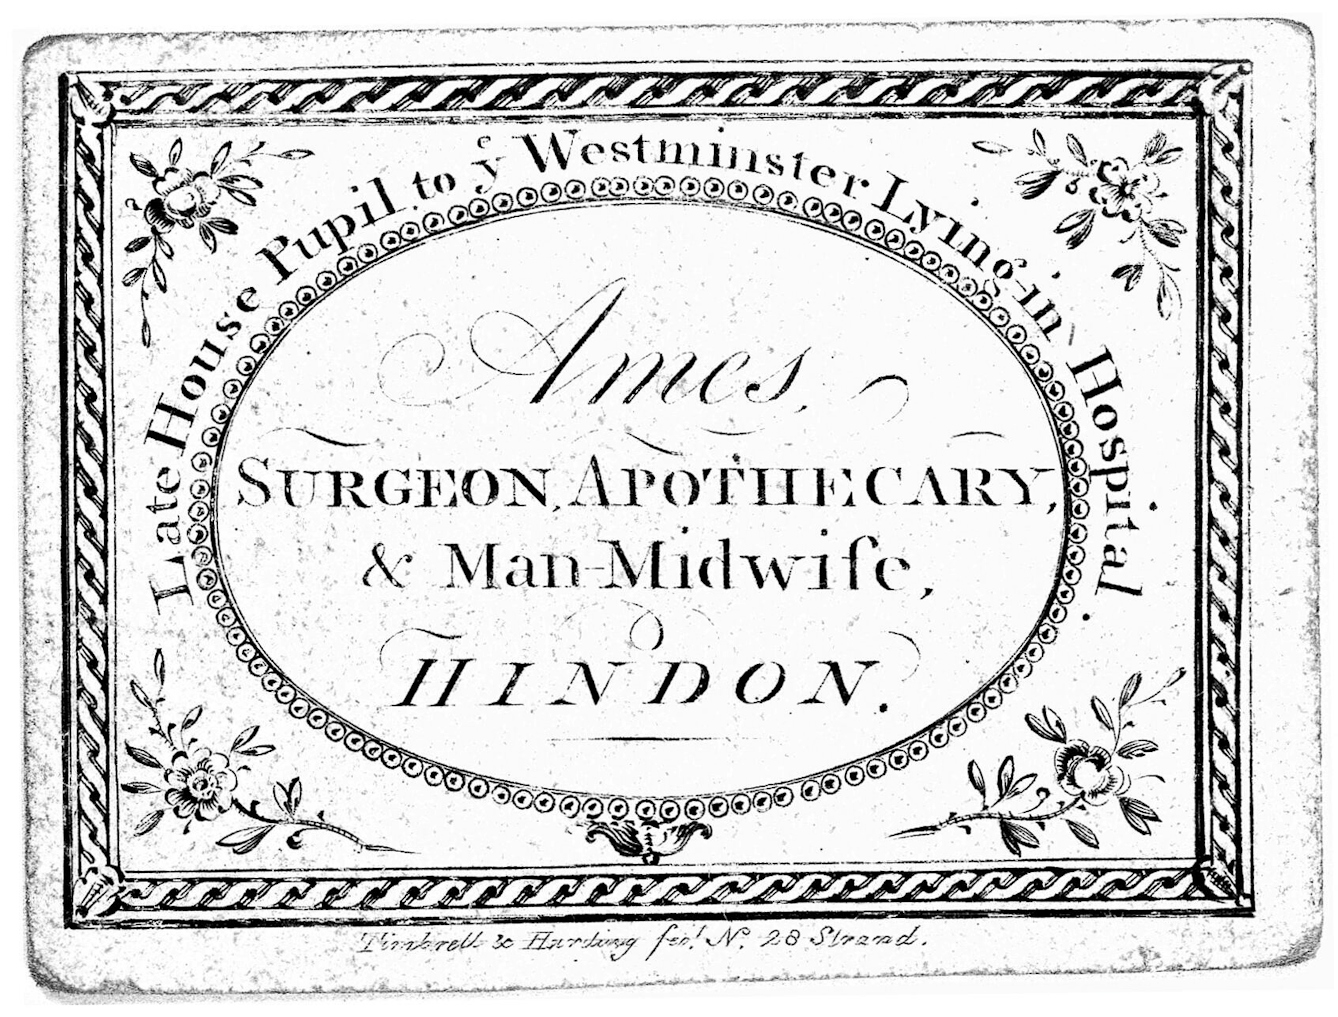 A black and white image of what appears to be a business card. In decorative text it says: Ames Hindon, Surgeon, Apothecary, and Man-Midwife, Late House Pupil to Westminster Lying-in Hospital